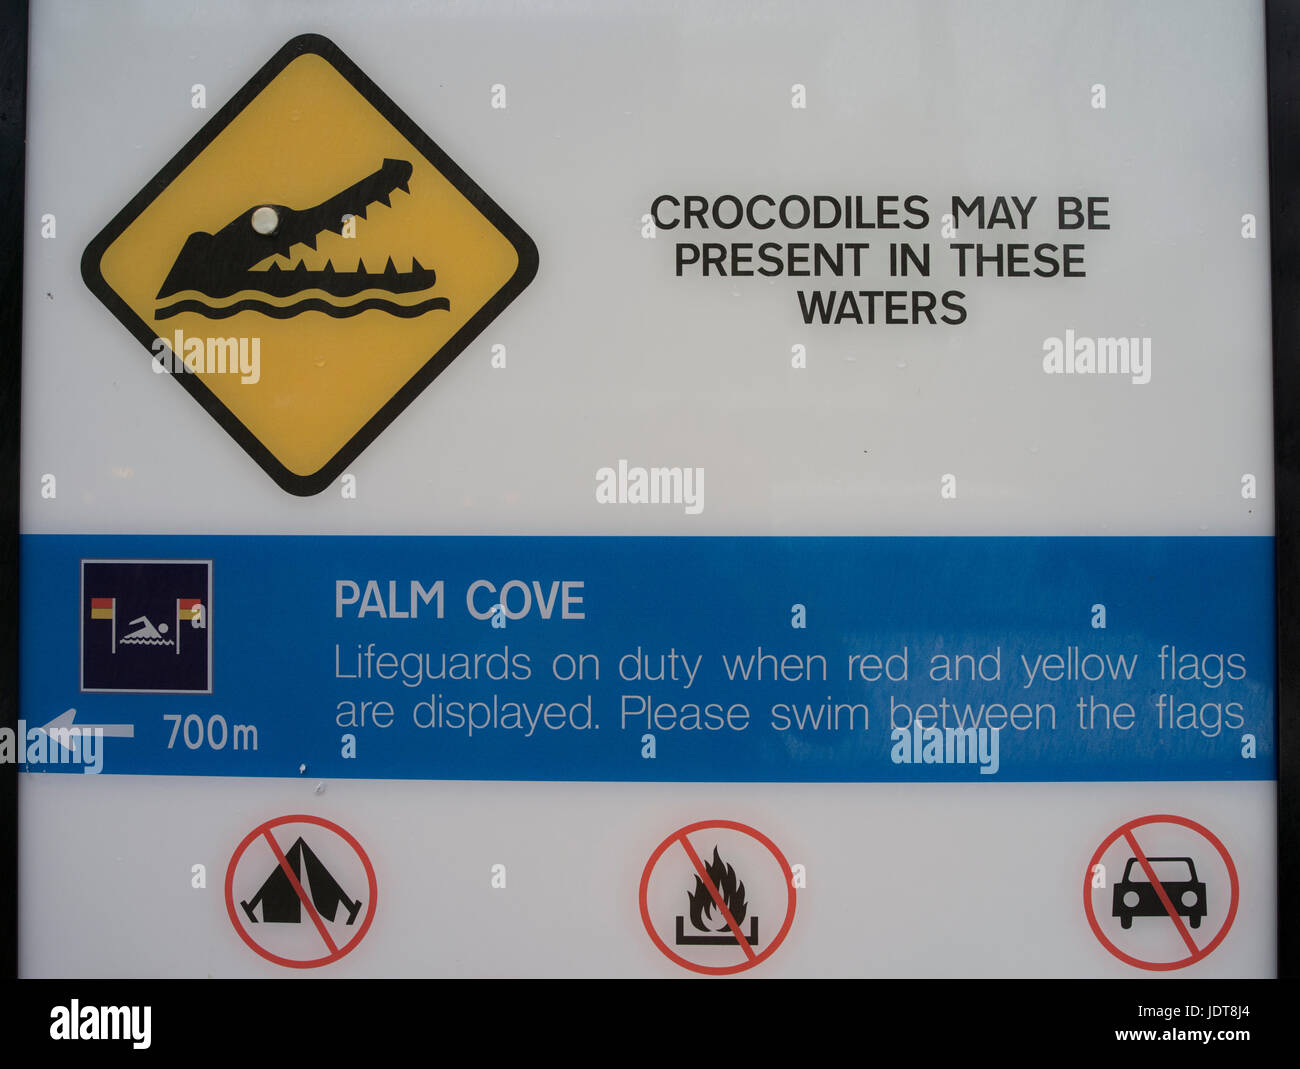 Crocodile warning sign at Palm Cove, near Cairns, Queensland, Australia Stock Photo